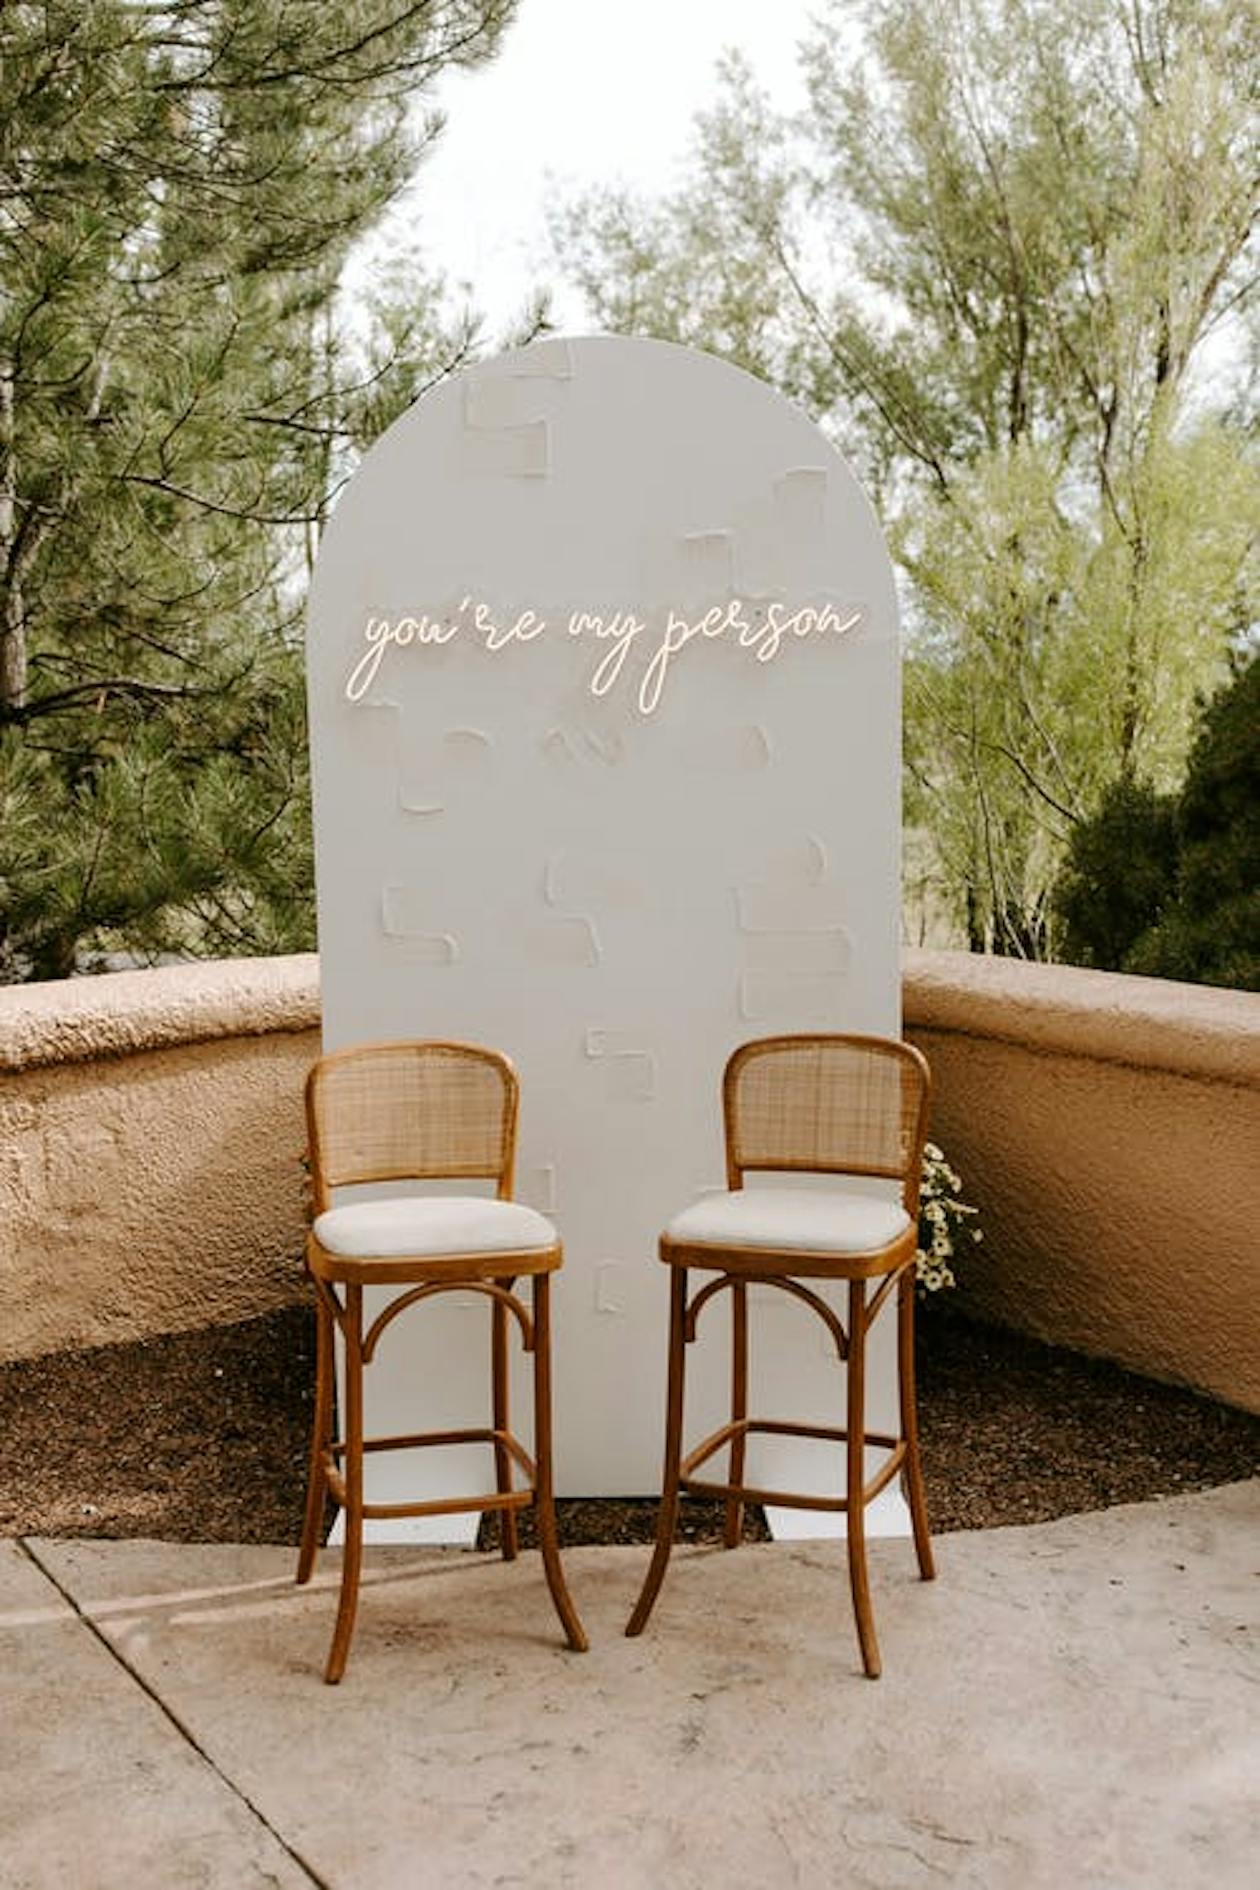 Wedding Backdrop with Sign and Two Chairs Outdoors | PartySlate